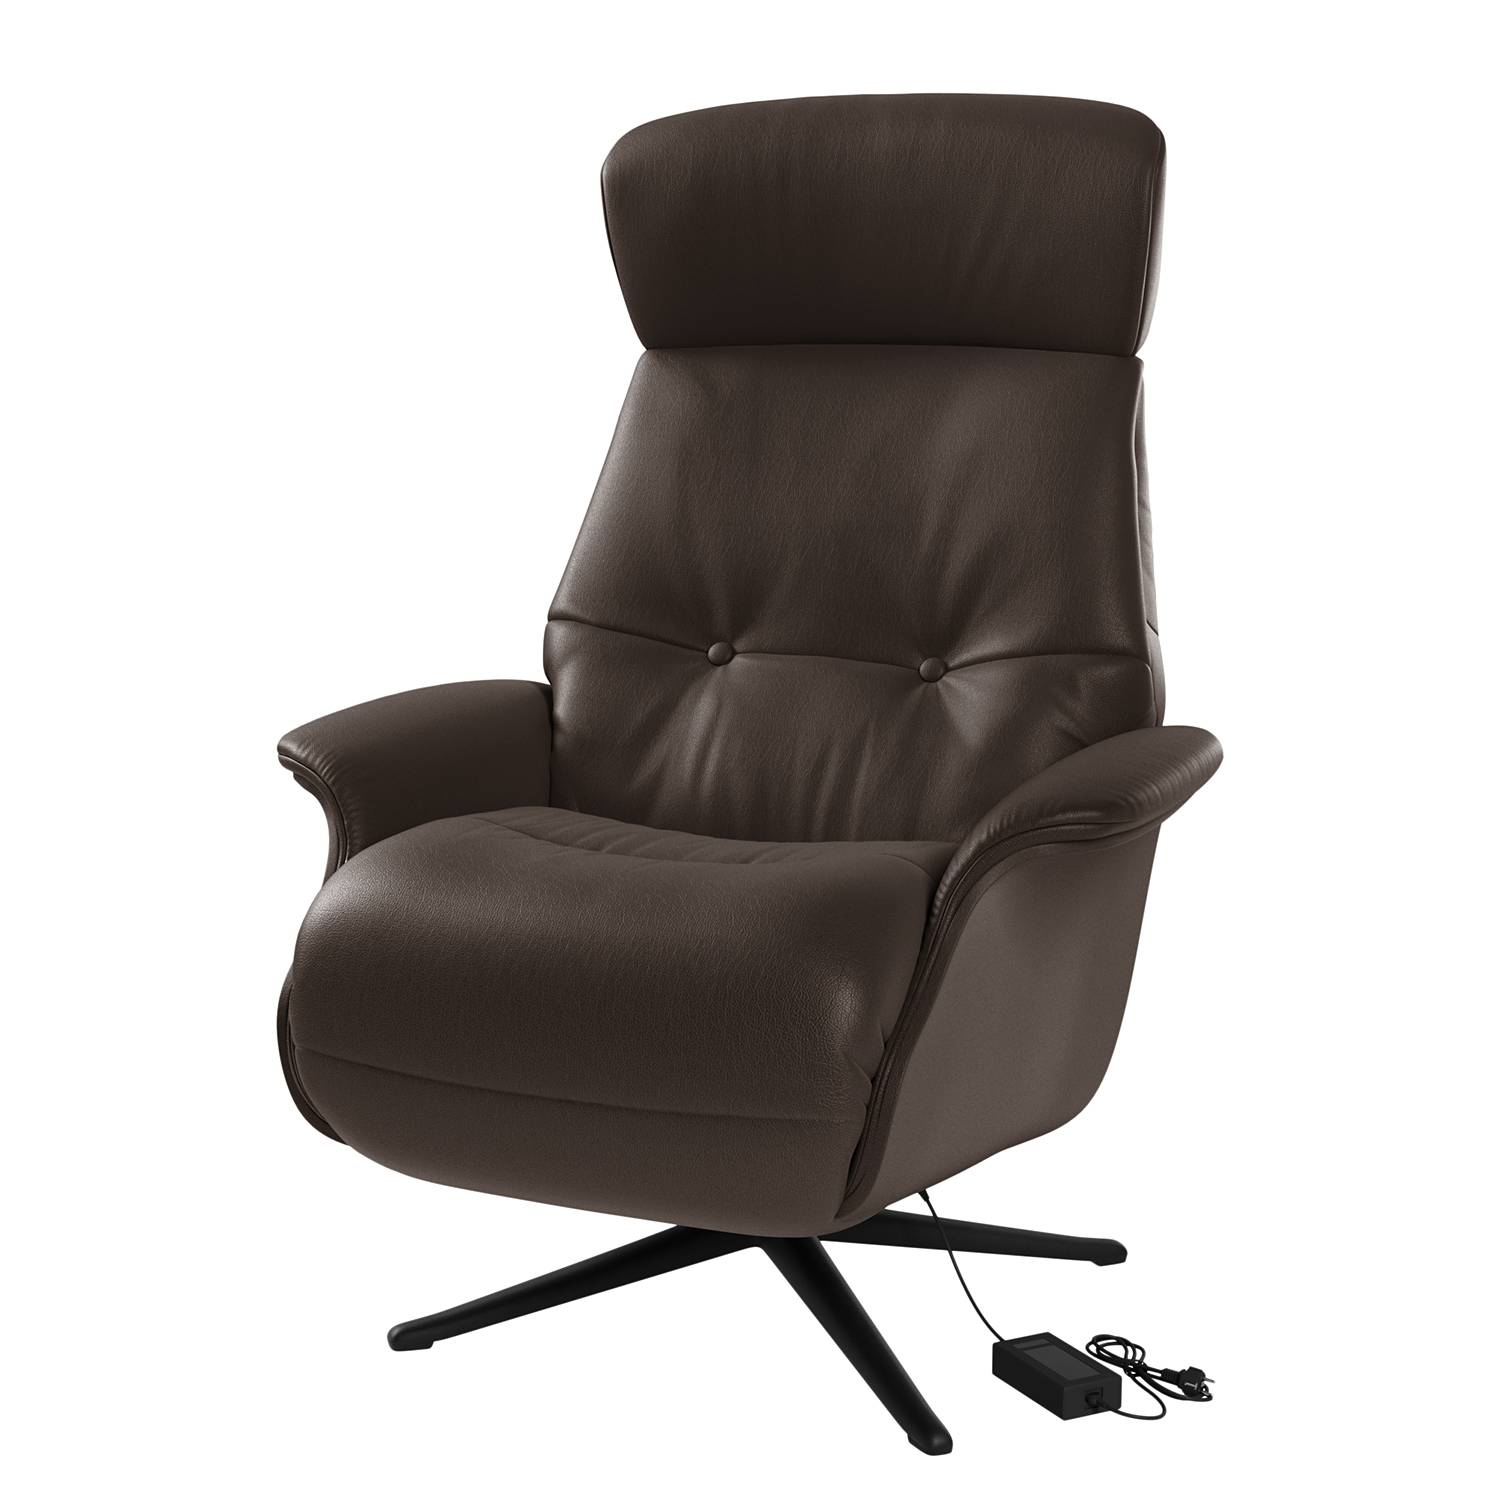 Image of Fauteuil relax Anderson VI 000000001000131456